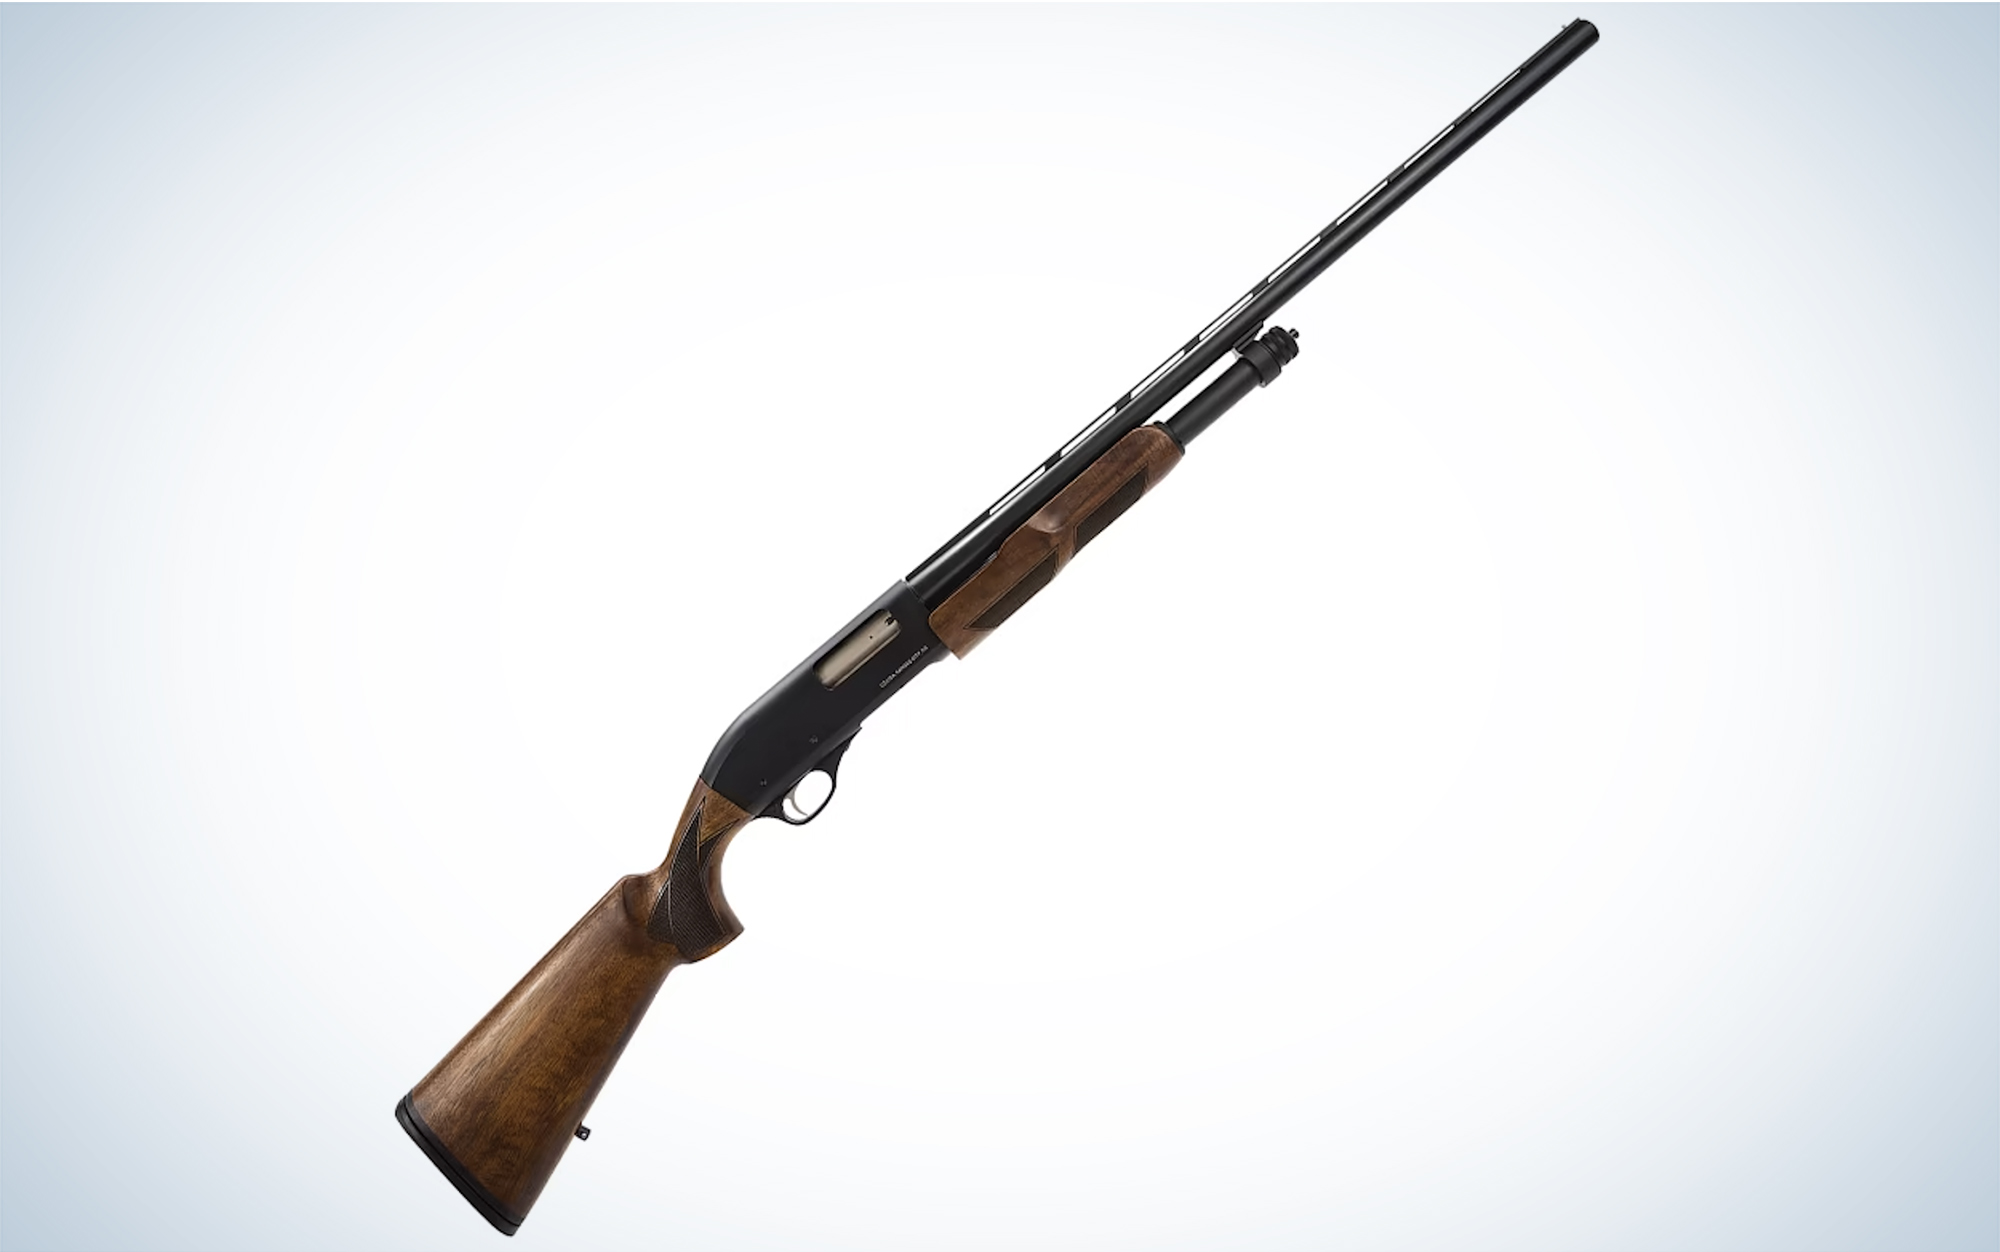 The CZ-USA 612 Field is one of the best shotguns for sporting clays.